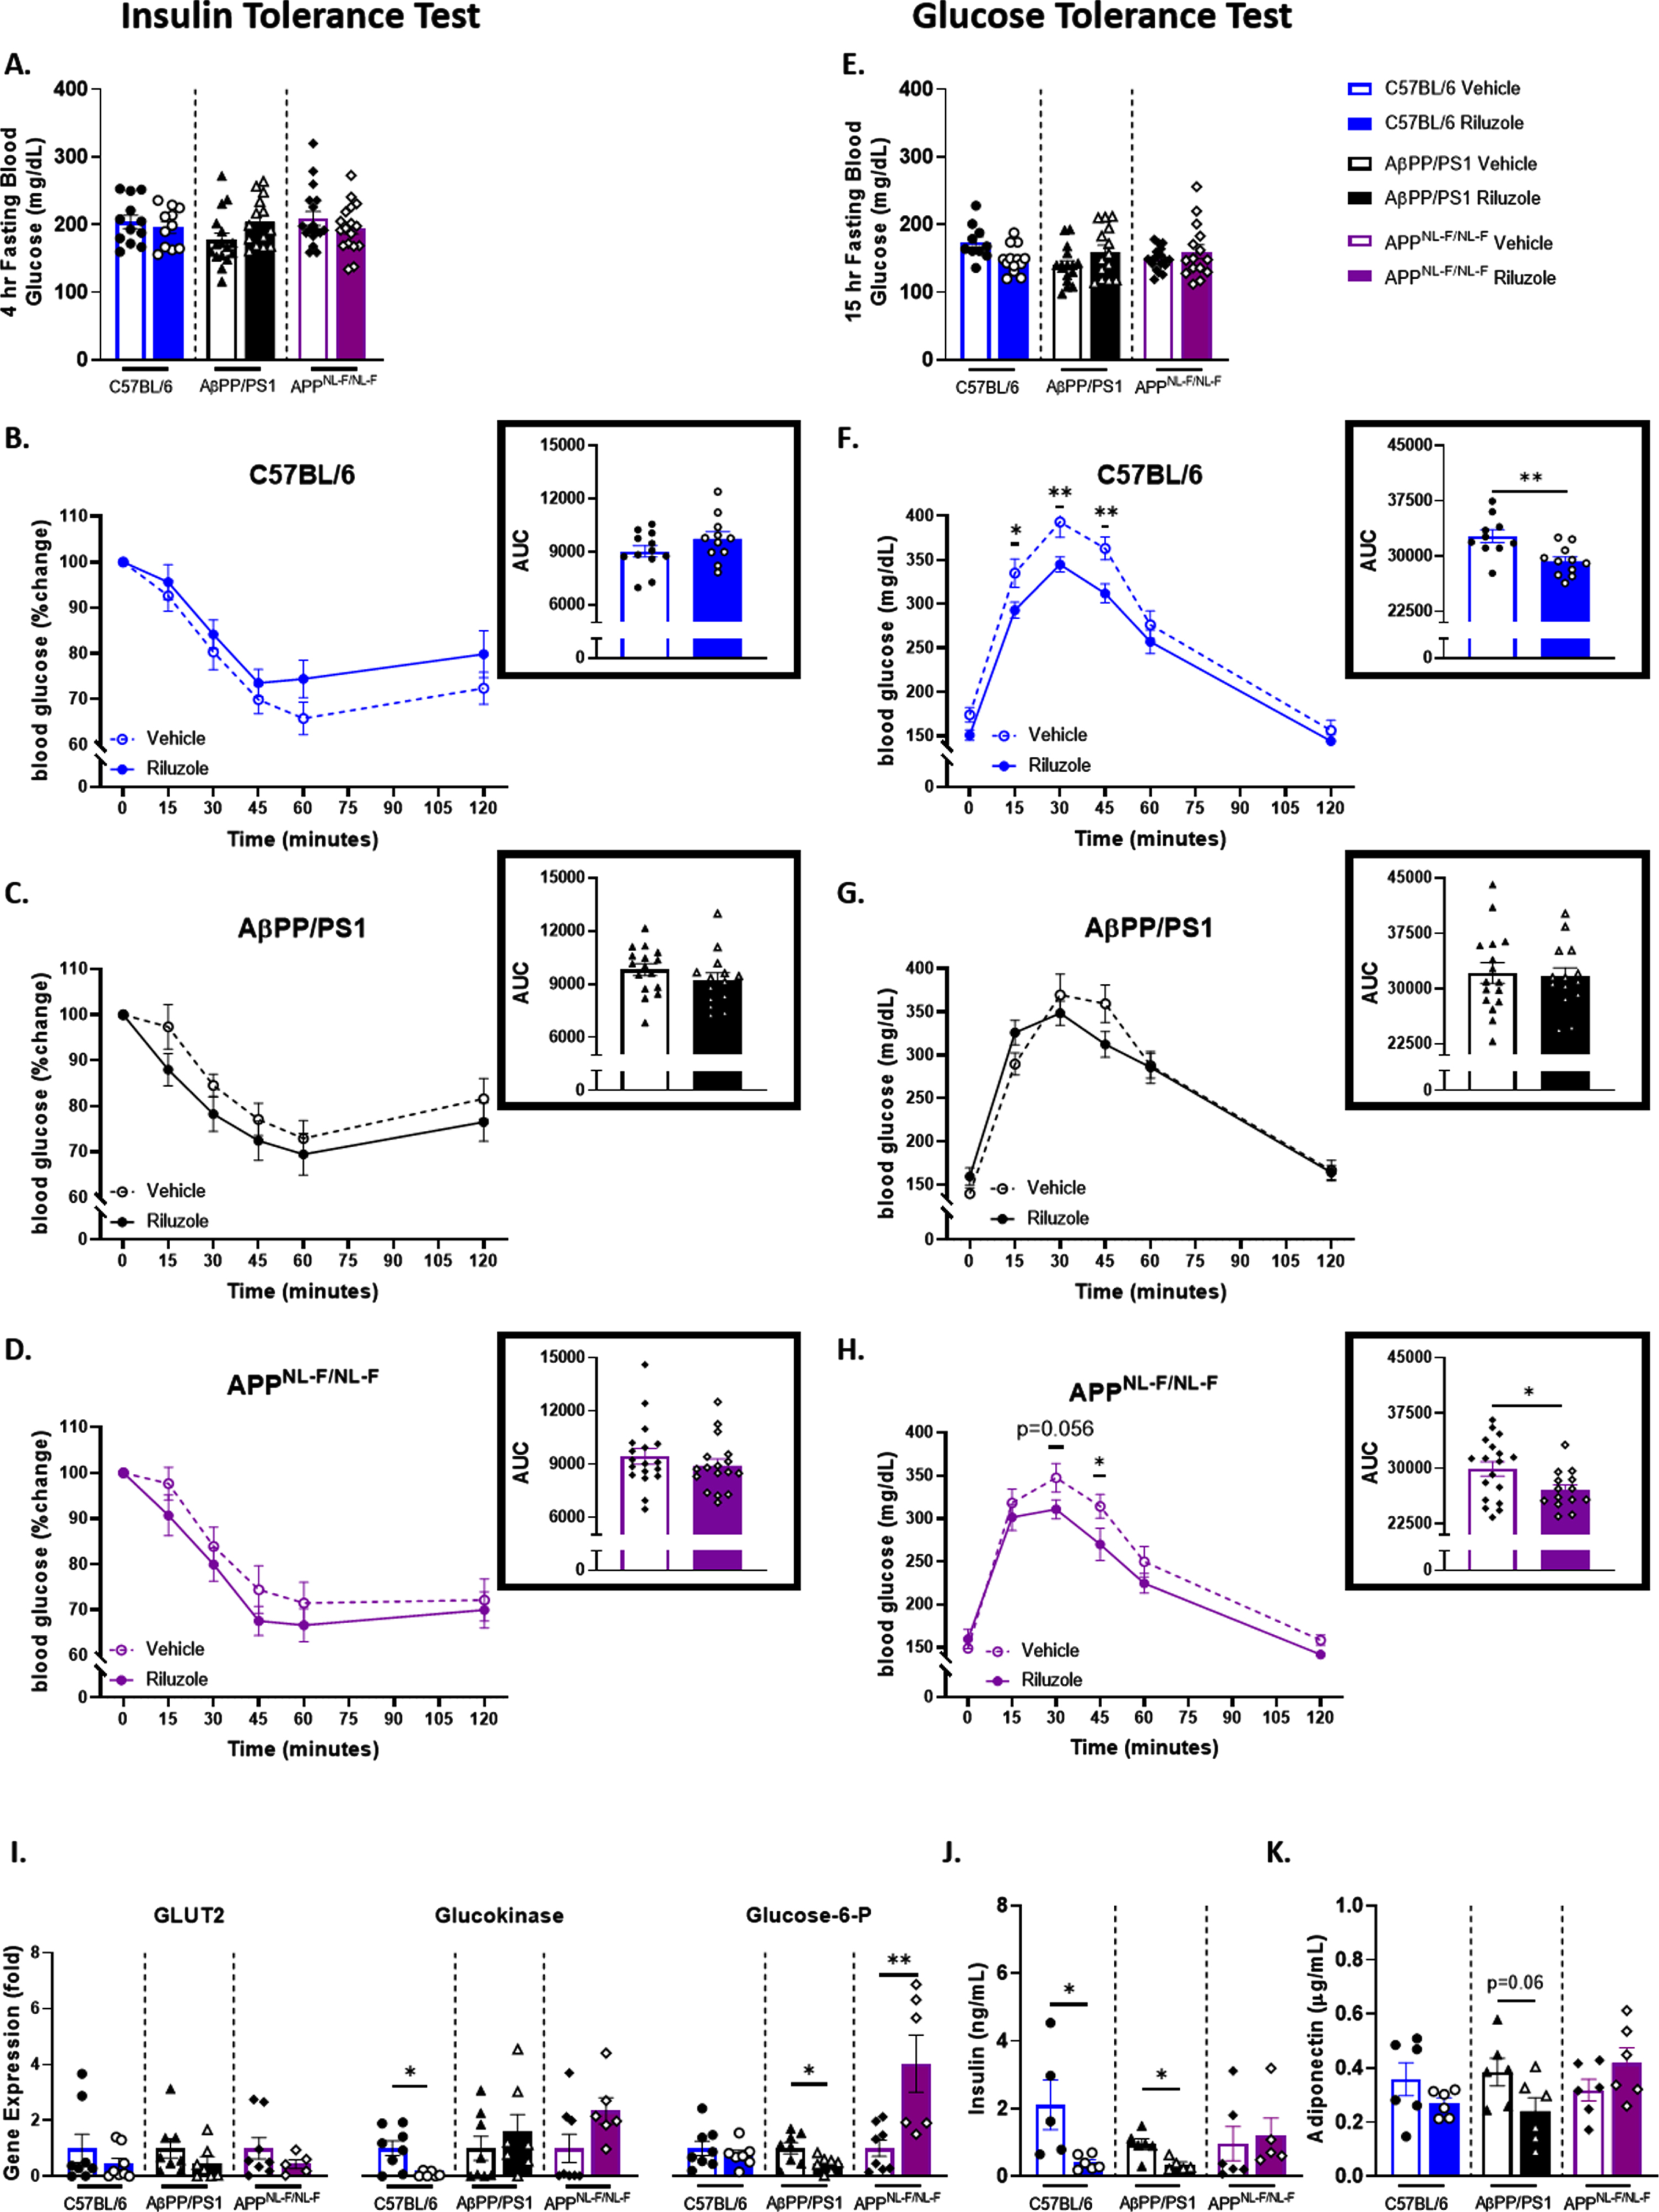 Riluzole improves peripheral glucose tolerance in male APPNL - F/NL - F mice and littermate C57BL/6 mice at 6 months of age. A) Blood glucose levels acquired from the tail vein after a 4 hour fast. B-D) Insulin tolerance was measured by percent change from baseline (T = 0). Insets depict percent change AUC for each genotype (C57BL/6, AβPP/PS1, and APPNL - F/NL - F) and treatment group. E) Blood glucose levels obtained from the tail vein after a 15-h fast. F-H) Blood glucose levels measured on the same time course as previously described following IP injection of glucose. Insets show AUC for each genotype and treatment group. I) RT-PCR analysis of liver tissue. J, K) ELISA quantification of serum insulin and adiponectin levels. ITT/GTT time course, within-genotype repeated measures two-way ANOVA, Fisher’s LSD; AUC (n = 10–18), RT-PCR (n = 6–8), and ELISA analysis (n = 5–6) within-genotype unpaired t-test, *p < 0.05, **p < 0.01.